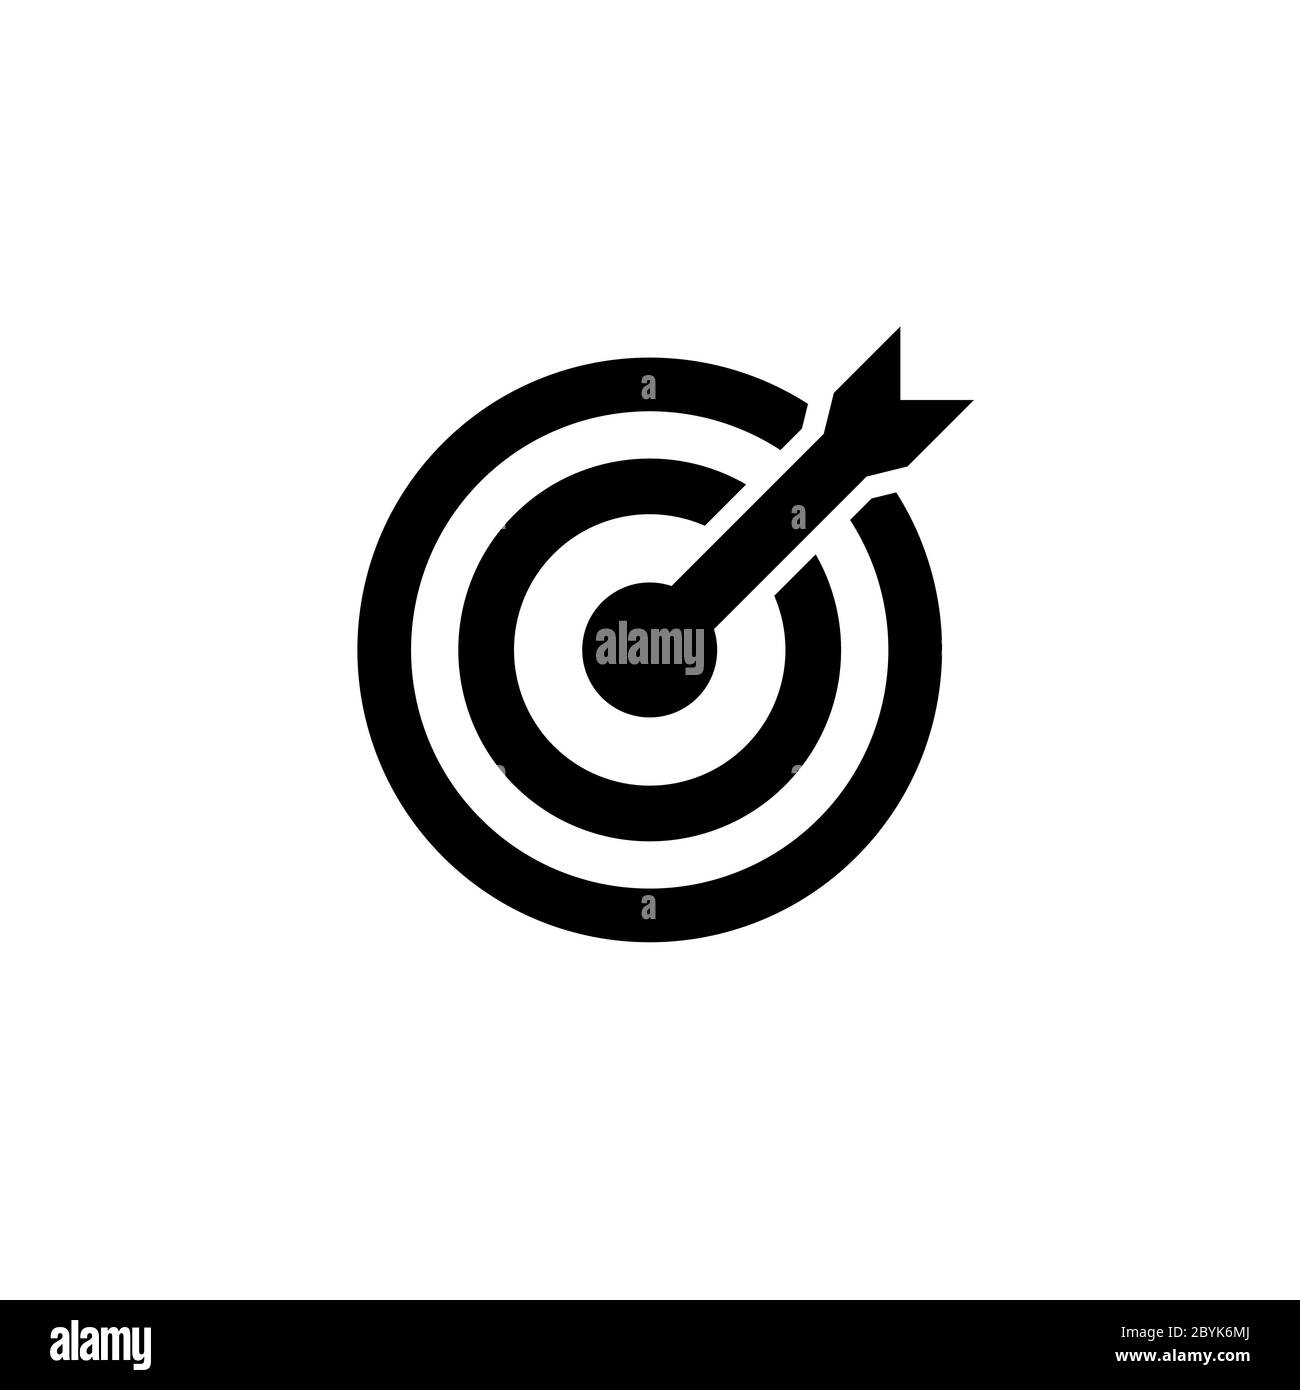 Mission icon or business goal logo in black design concept on an isolated white background. EPS 10 vector. Stock Vector